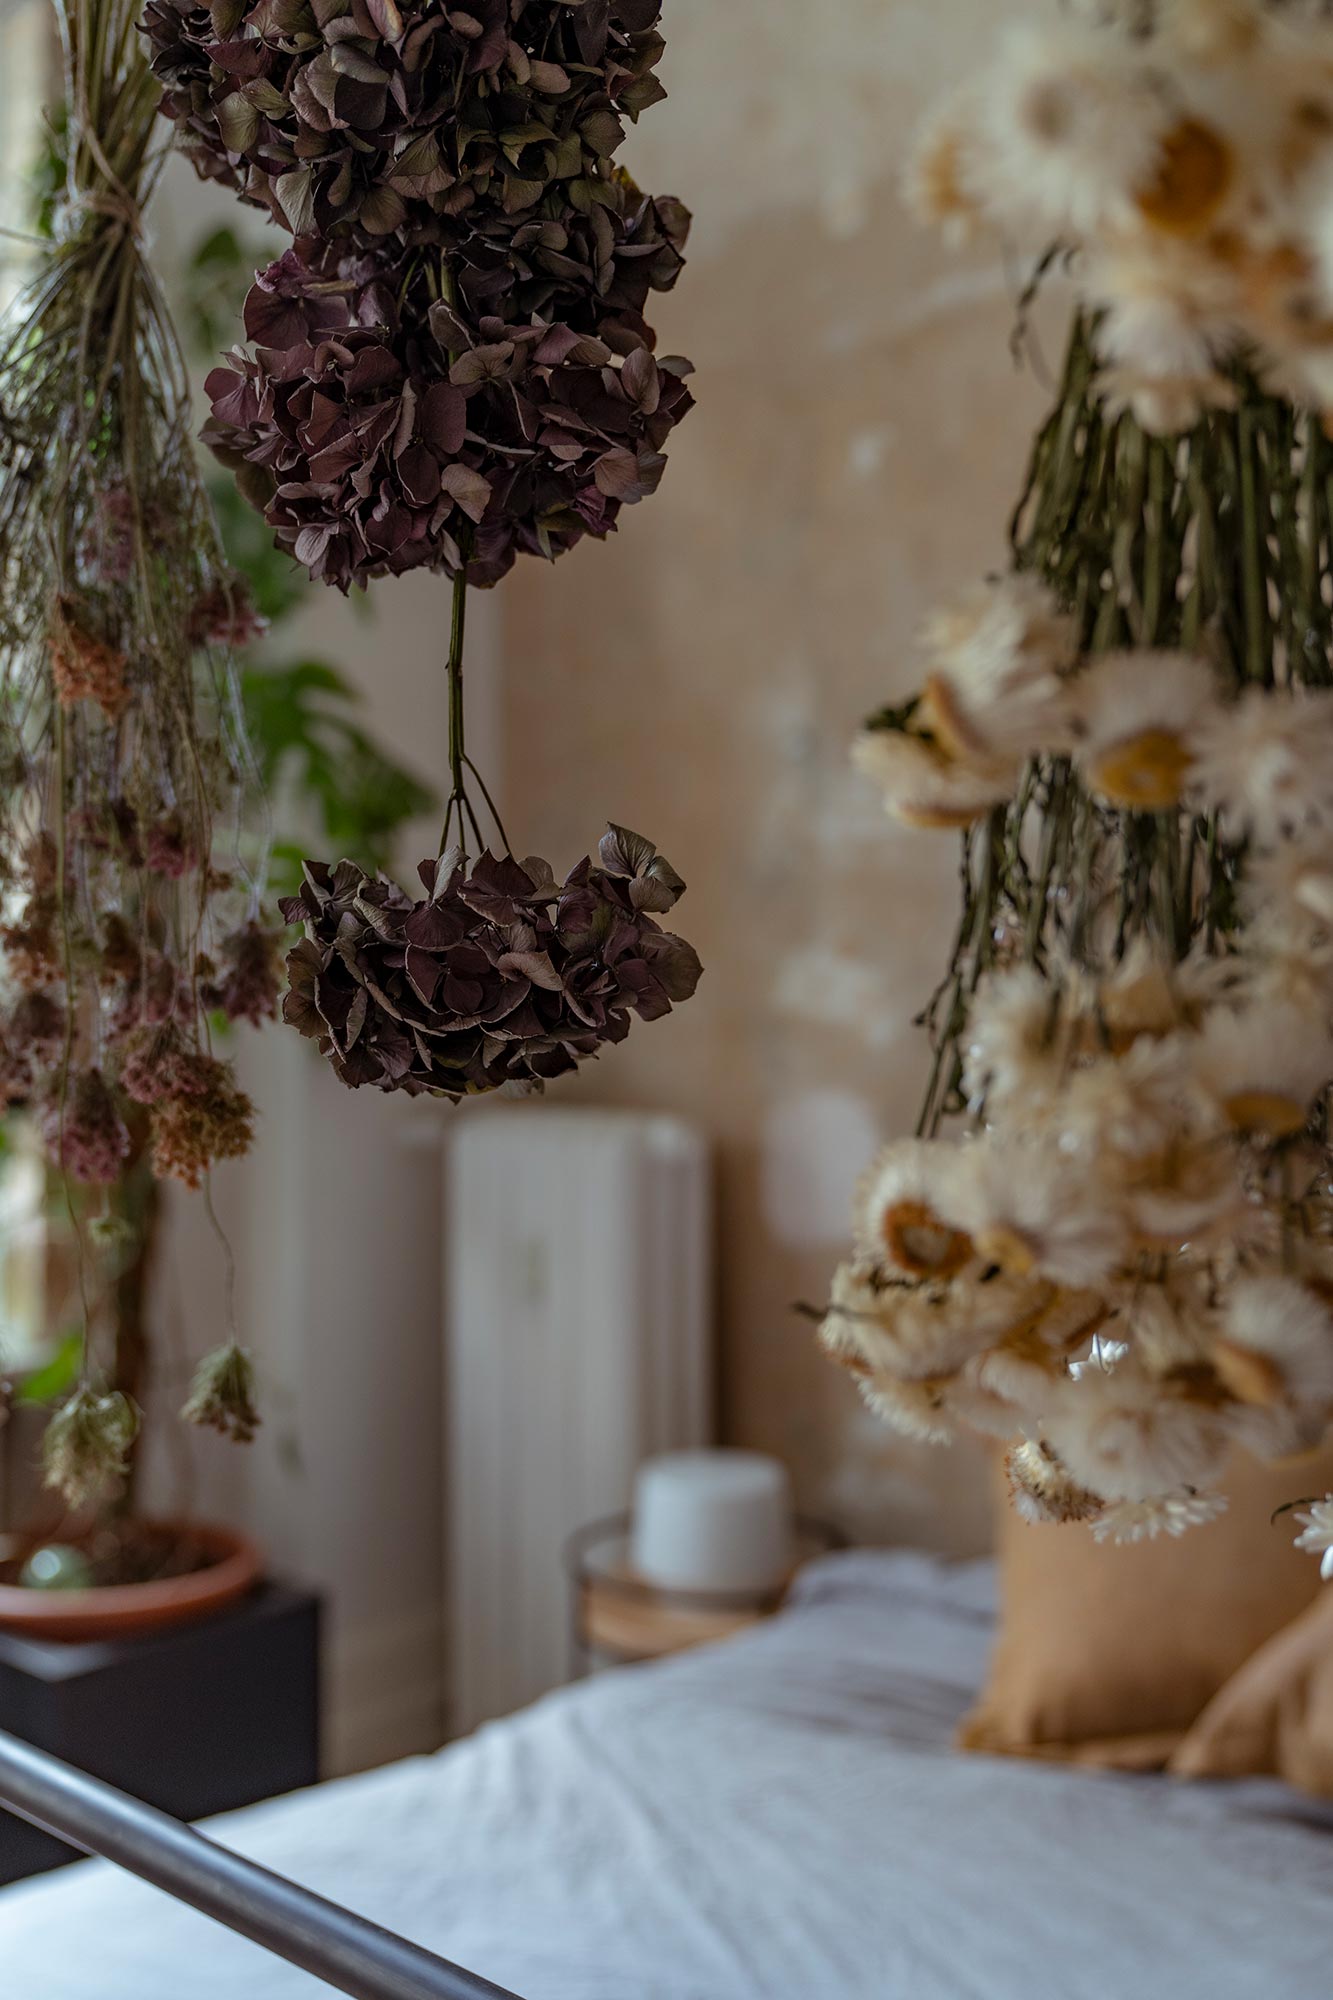 Bedroom with dried flowers